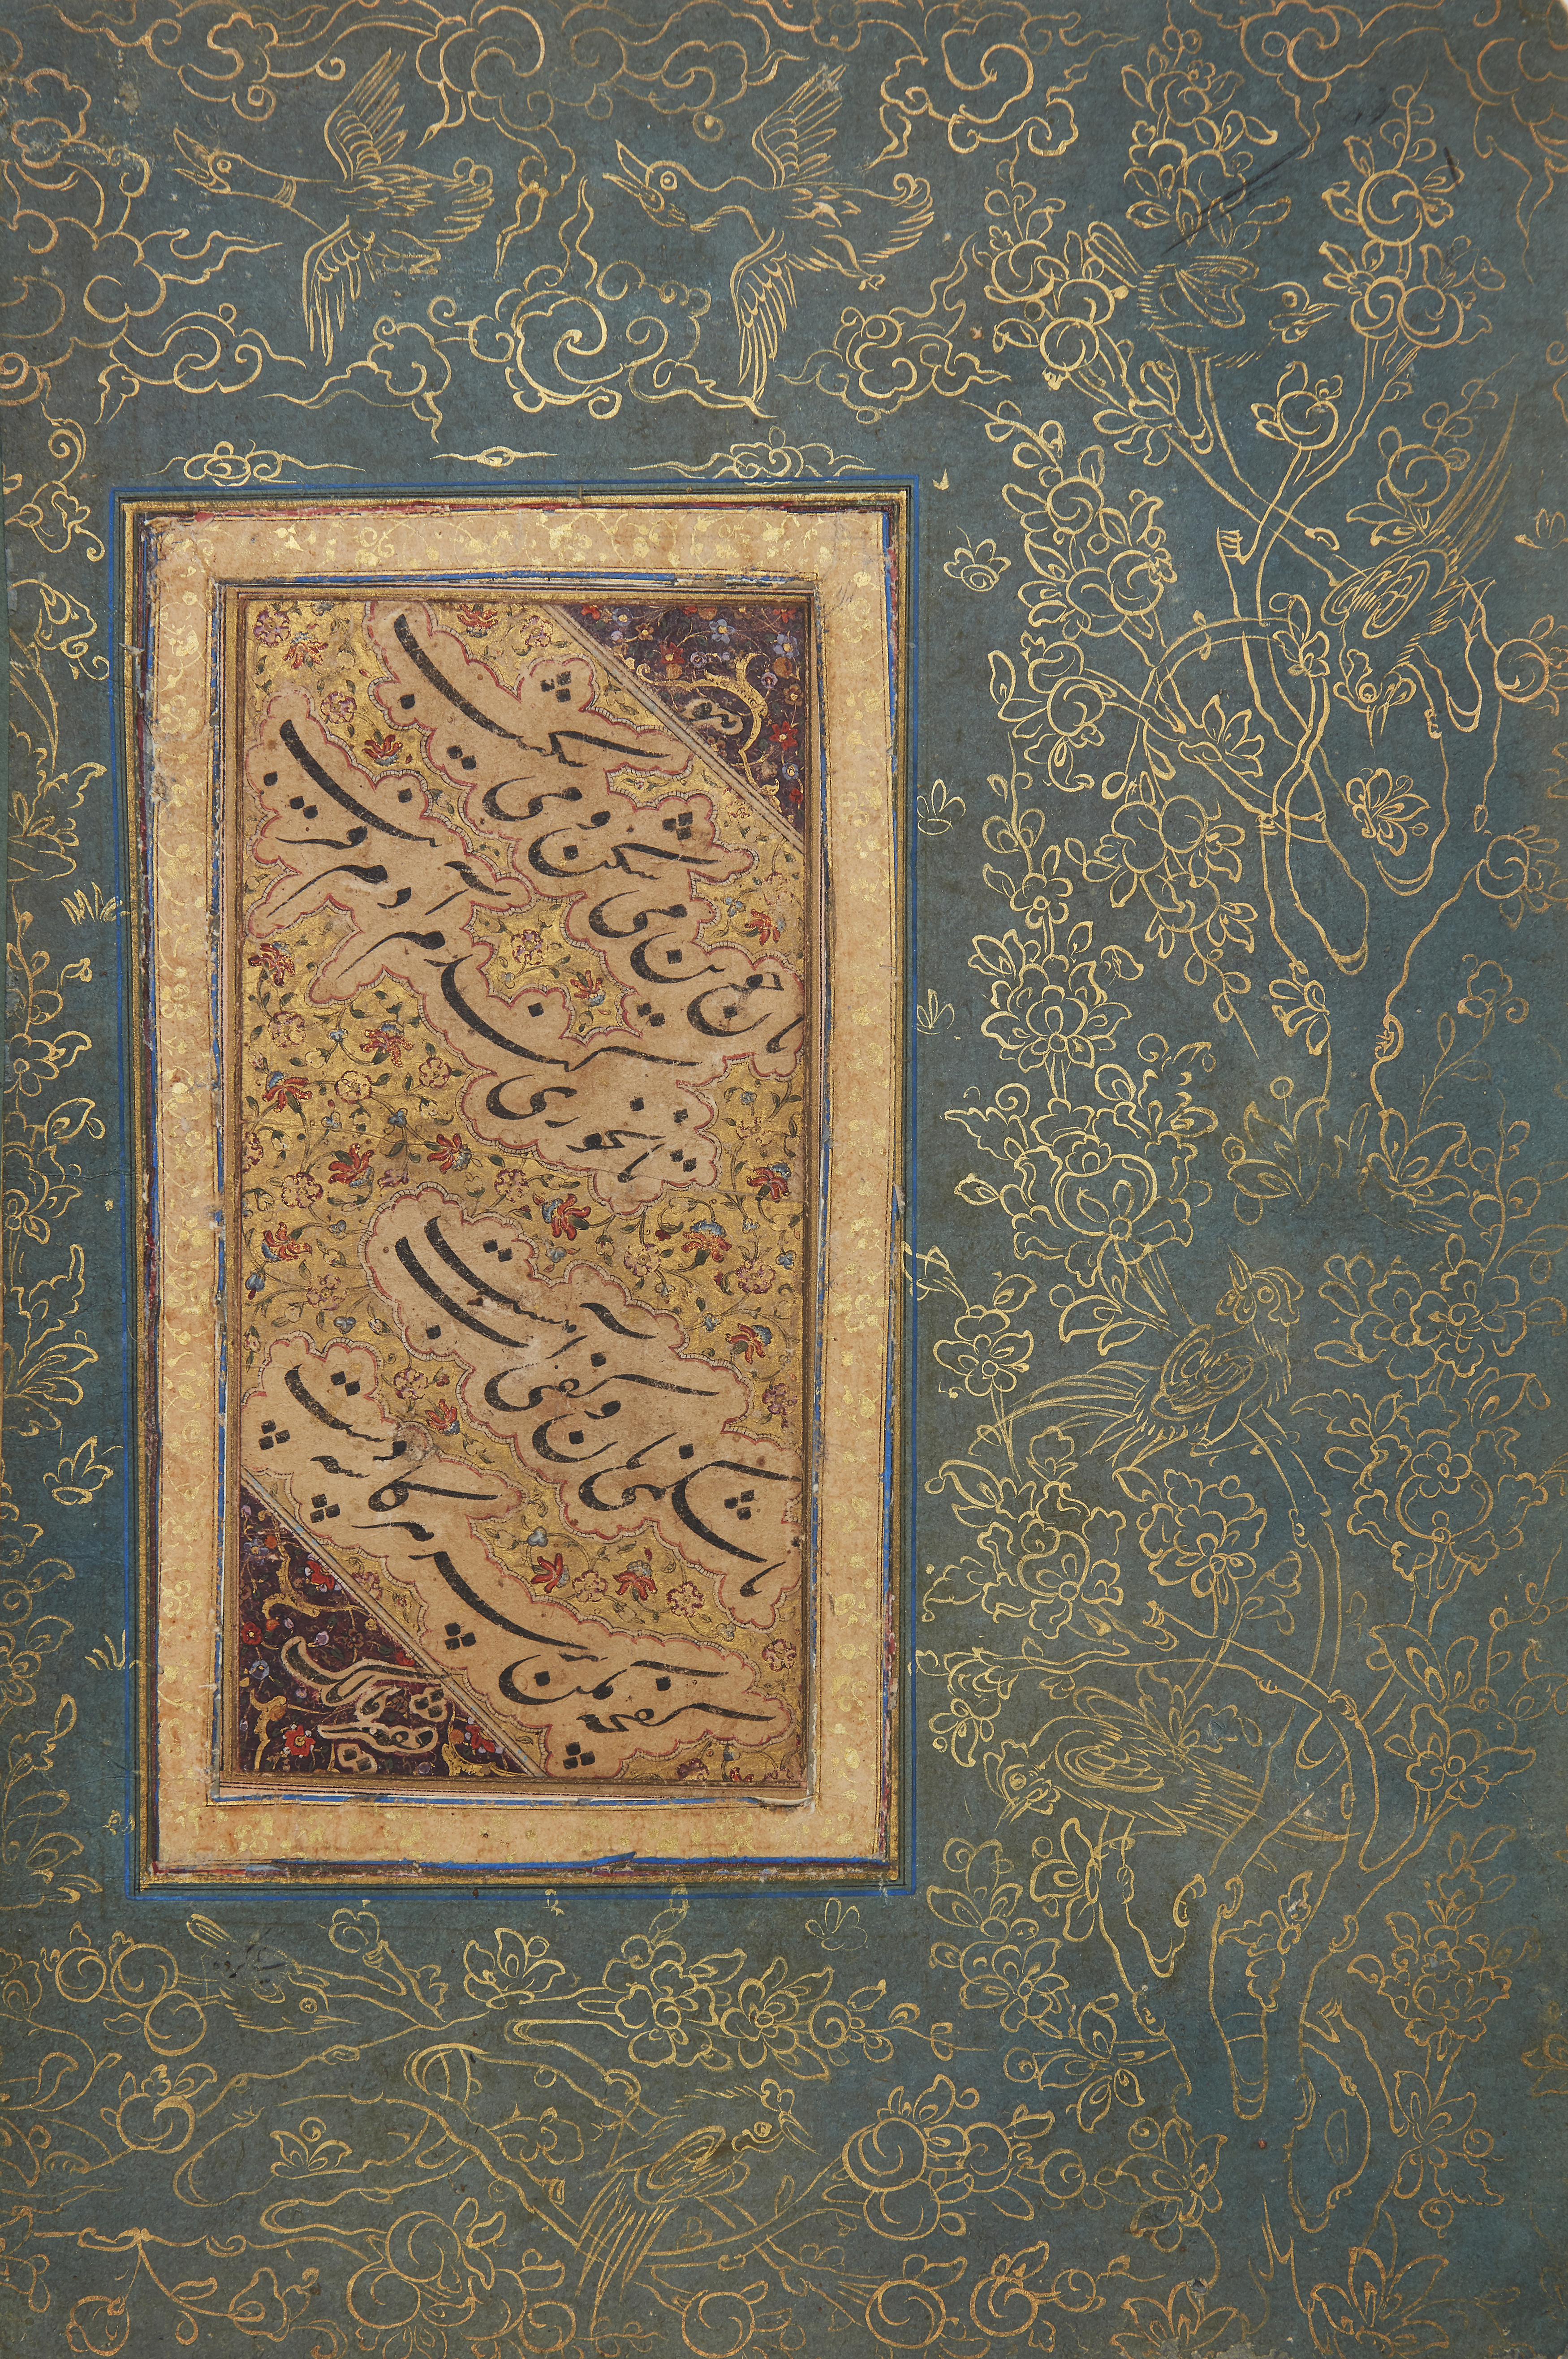 Property from An Important Private Collection Six calligraphic panels, Qajar Iran, 19th century...